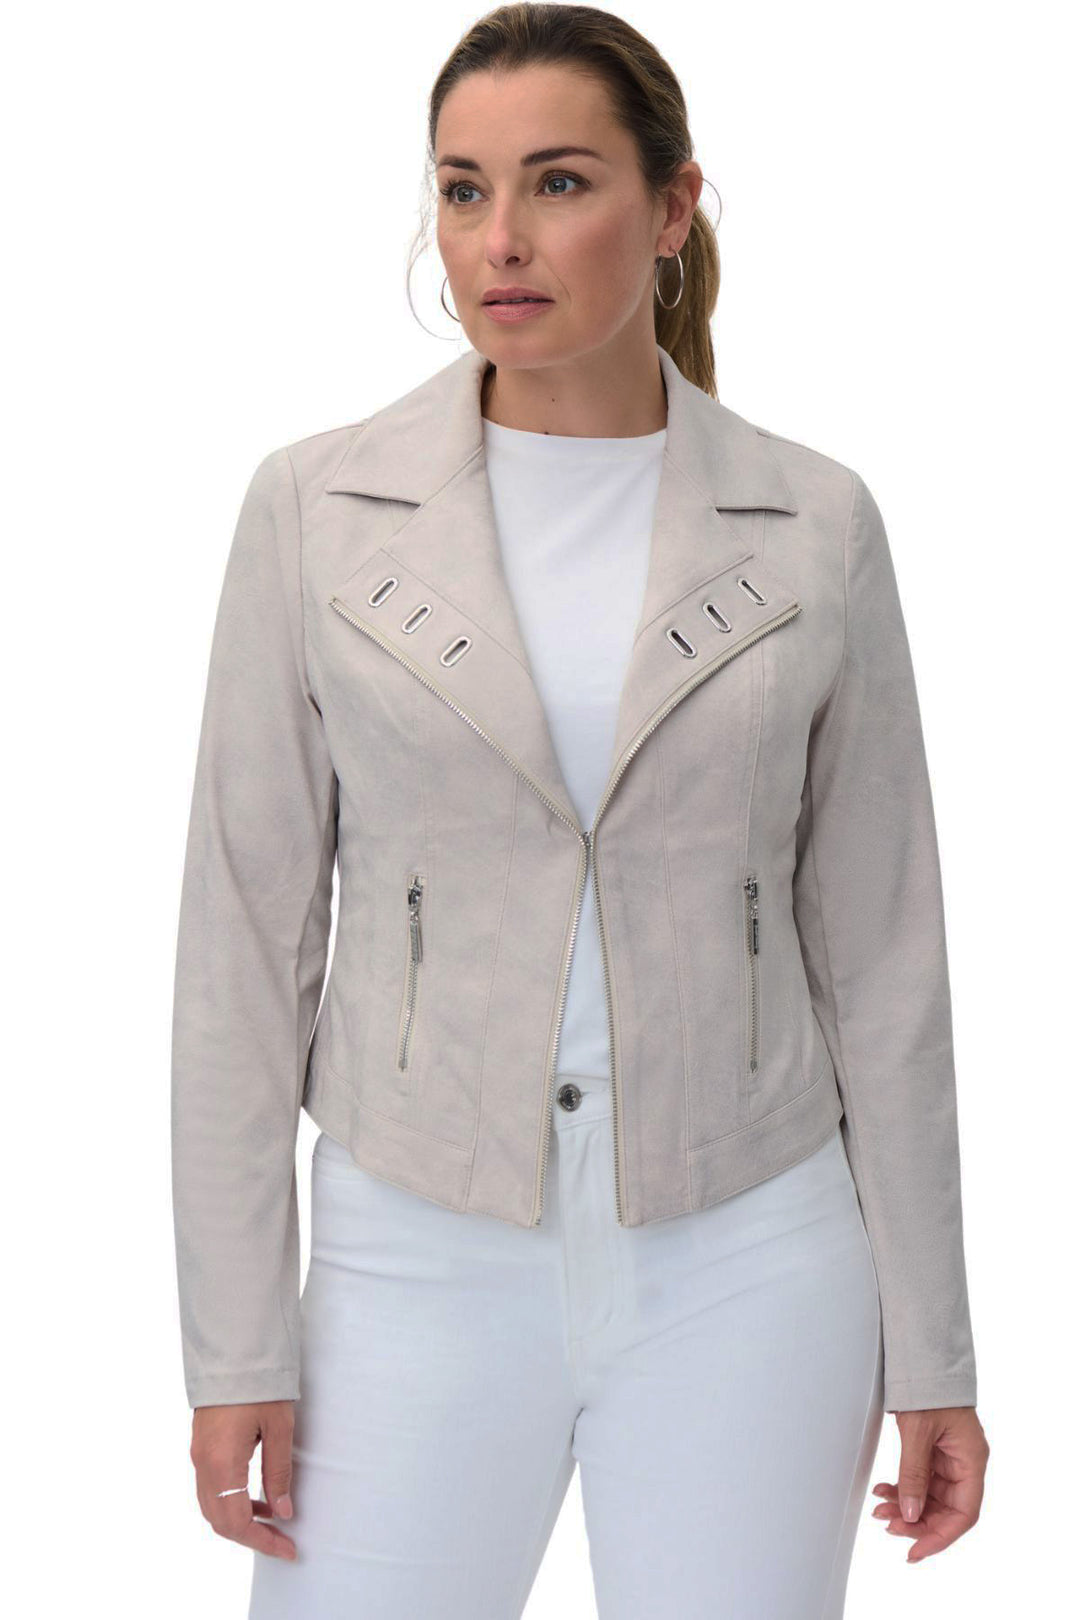 This crop style Dune Jacket from designer Joseph Ribkoff is the perfect summer jacket for your wardrobe! Cut in a lightweight fabric this jacket features full sleeves and is lined, and the perfect jacket for layering this season  Style Code : 231934 Fabric 100% Polyester / Lining 92% Polyester 8% Spandex  Hand wash in cold water Hook & eye closure (the zip is a design feature)